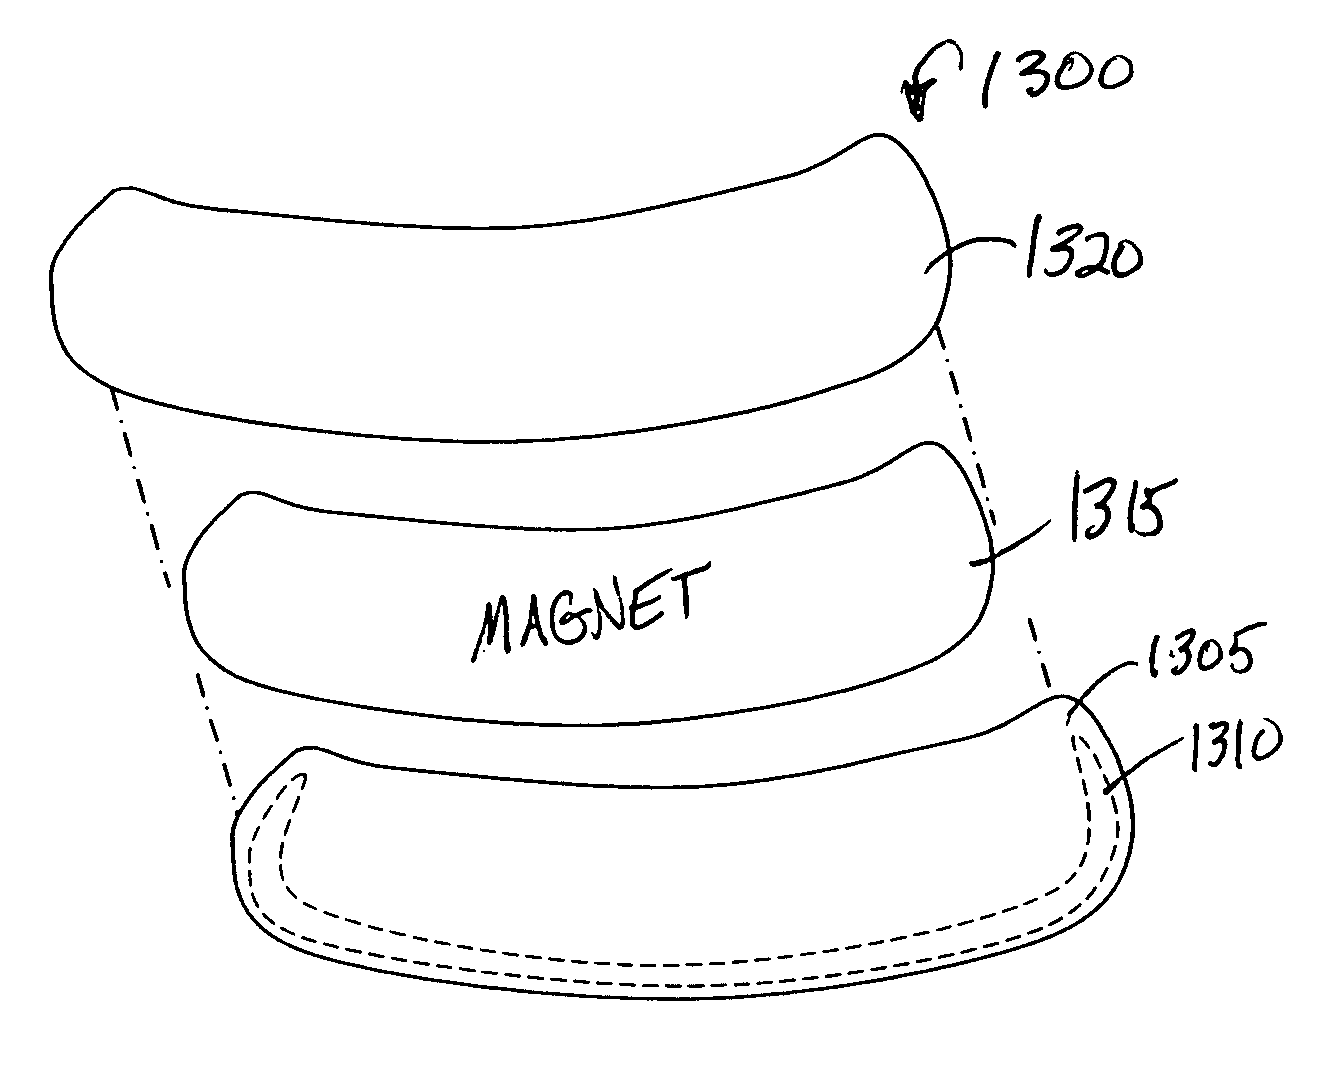 Apparatus and method for reducing vision problems as a result of floaters